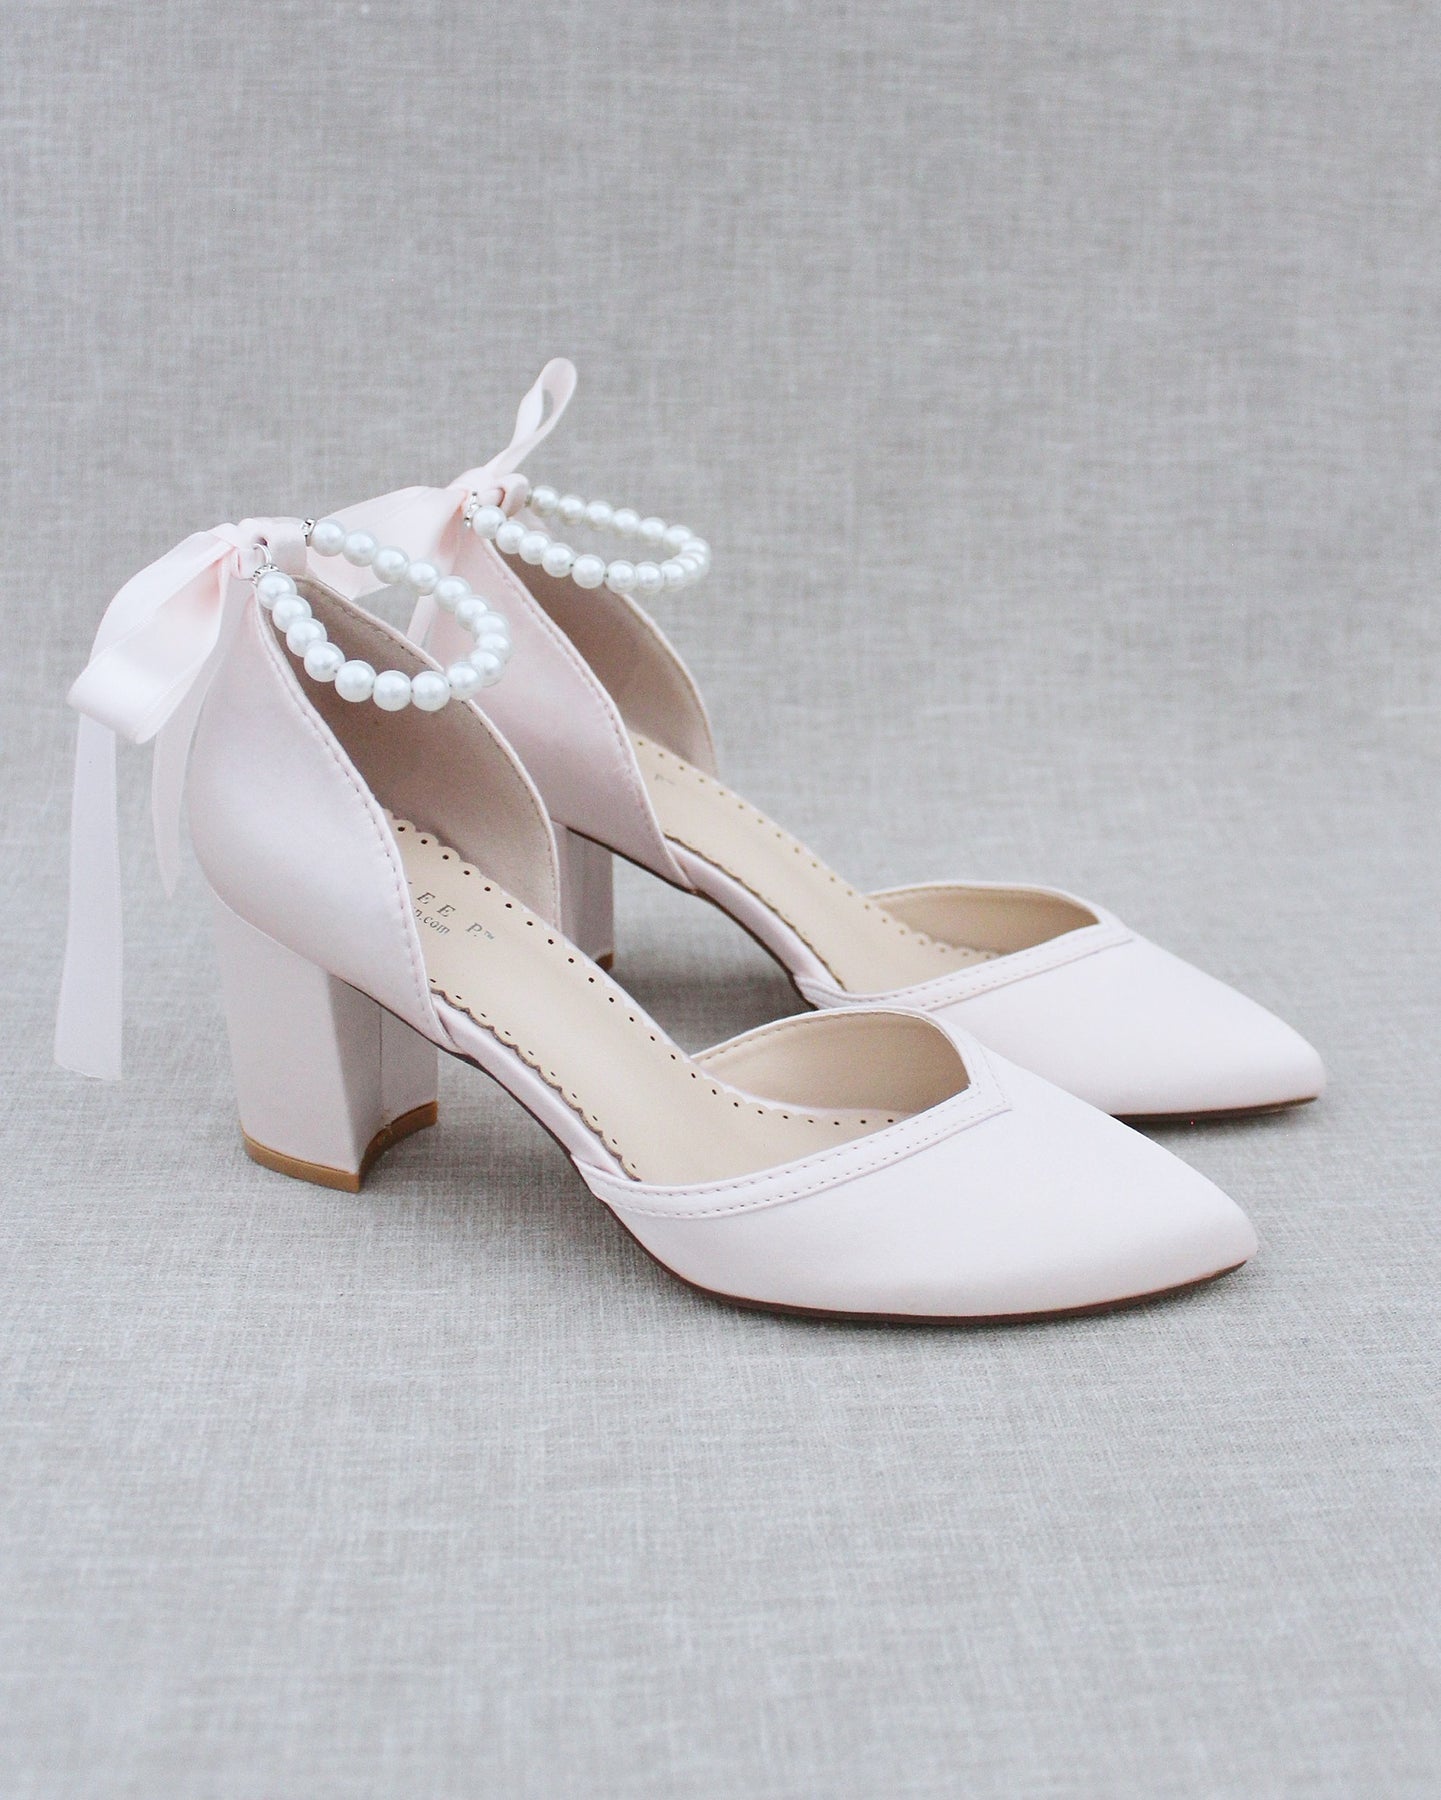 Pearl Ankle Strap Evening Block Heel, Prom Shoes, Bridesmaids Shoes ...